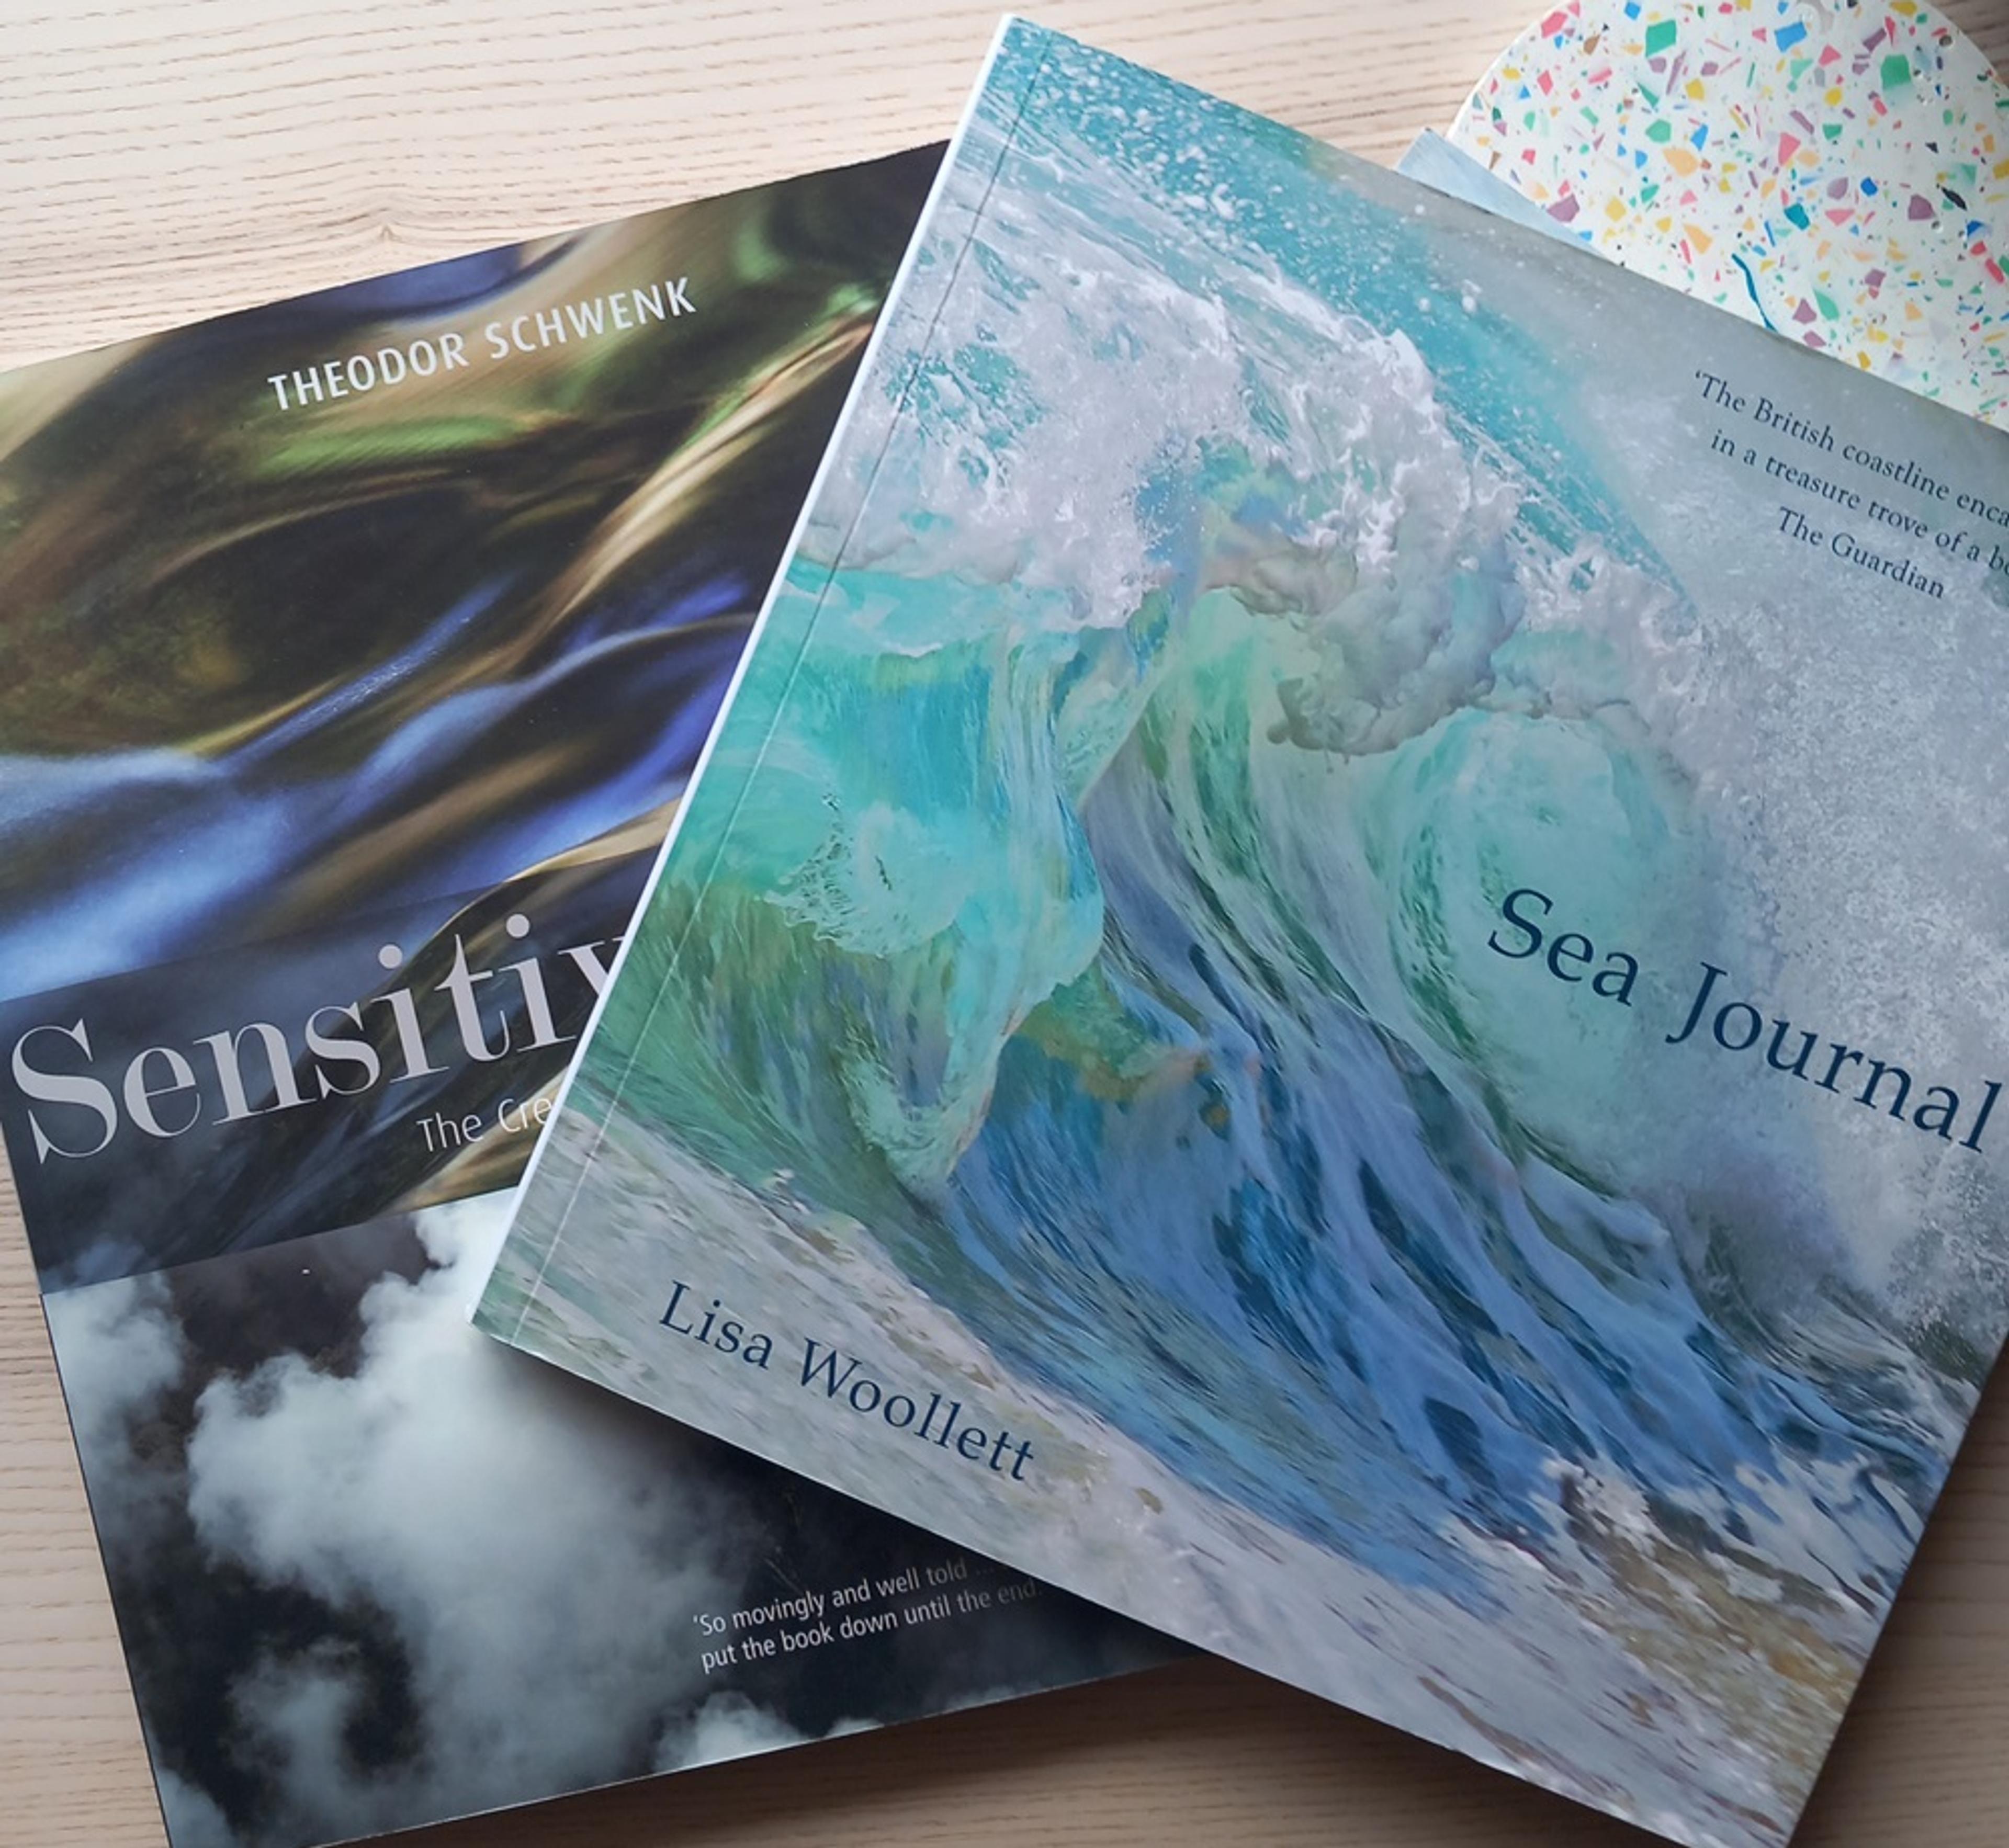 A pair of books that have informed Chloë’s work: Lisa Woollett’s Sea Journal (2016) and Sensitive Chaos (1965) by Theodor Schwenk.